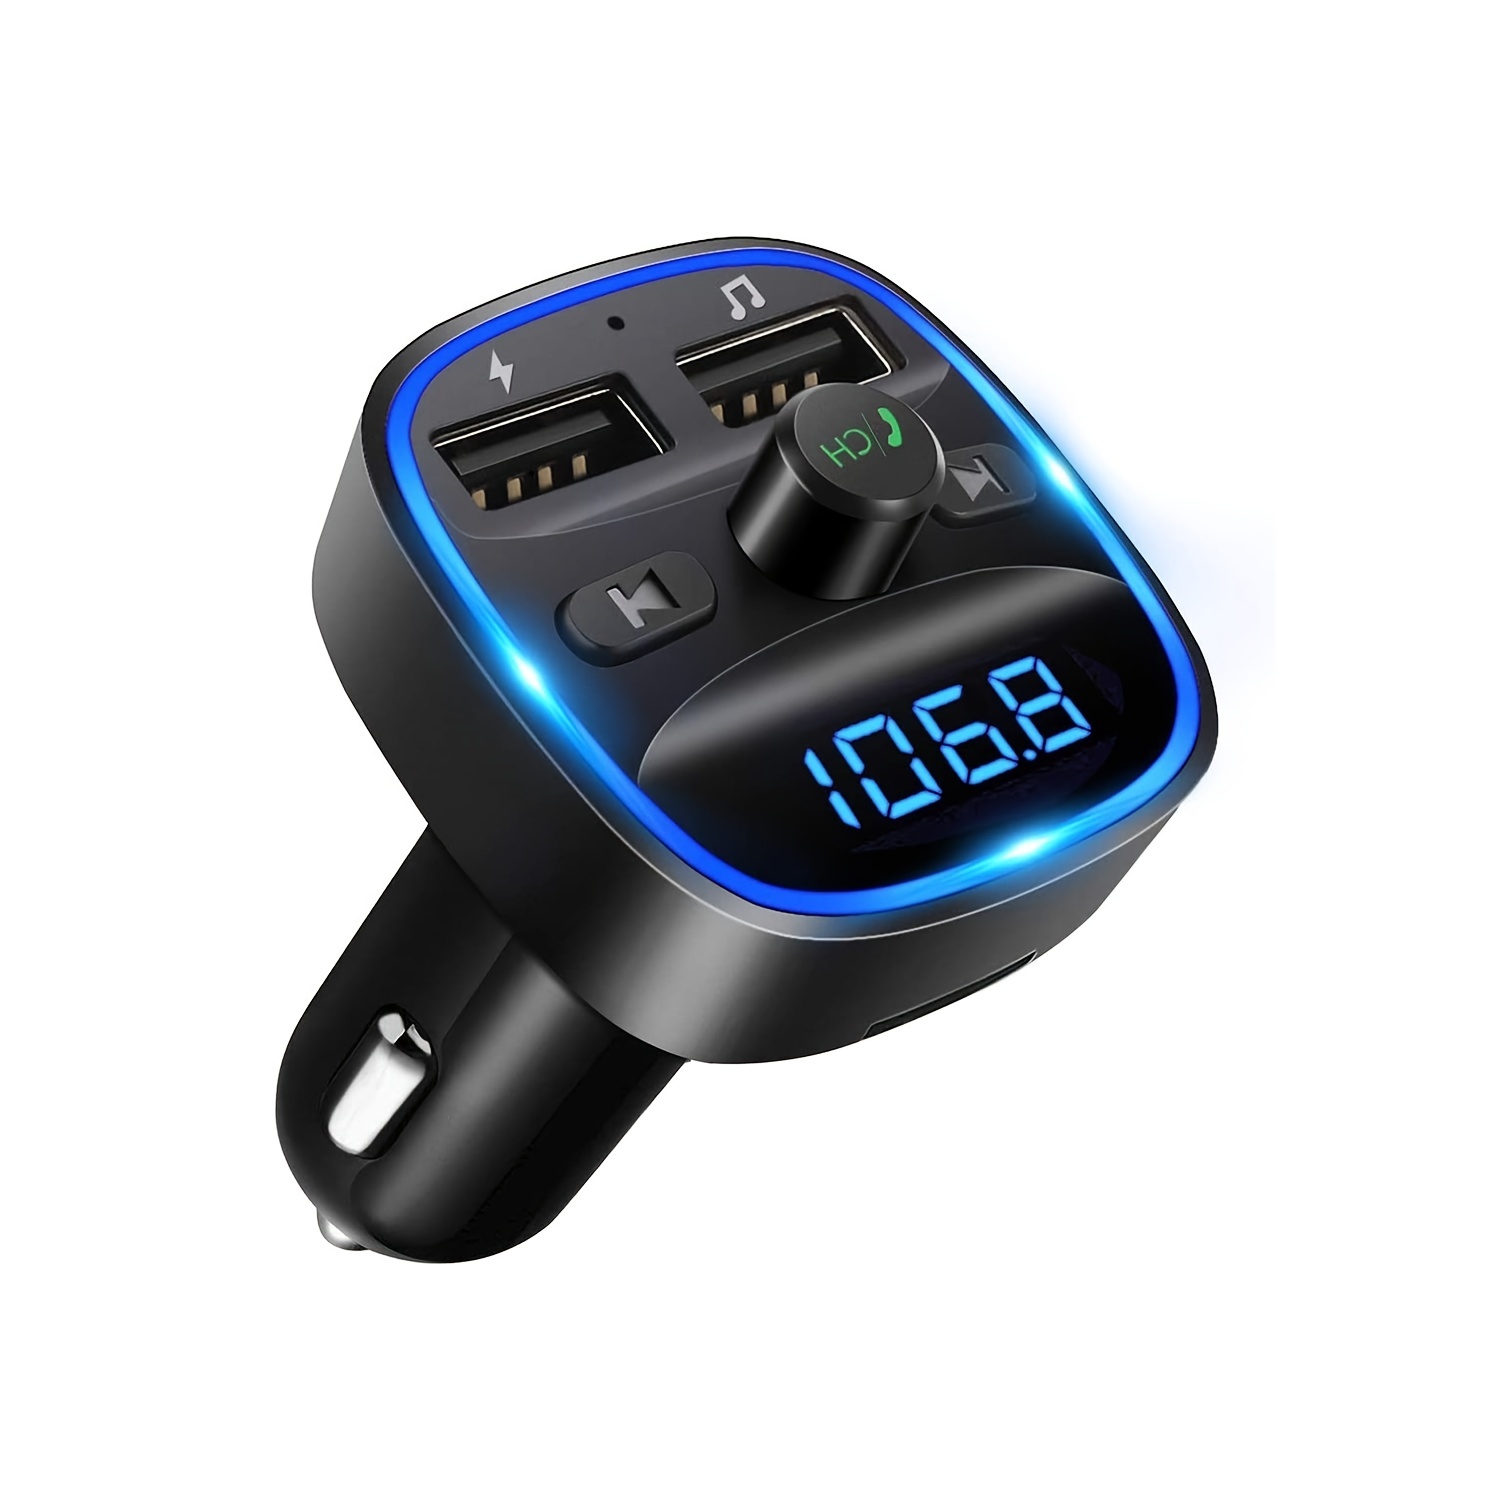  Upgraded Bluetooth FM Transmitter for Car, Wireless Radio  Adapter Kit W 1.8 Color Display Hands-Free Call AUX in/Out SD/TF Card USB  Charger QC3.0 for All Smartphones Audio Players - Black 